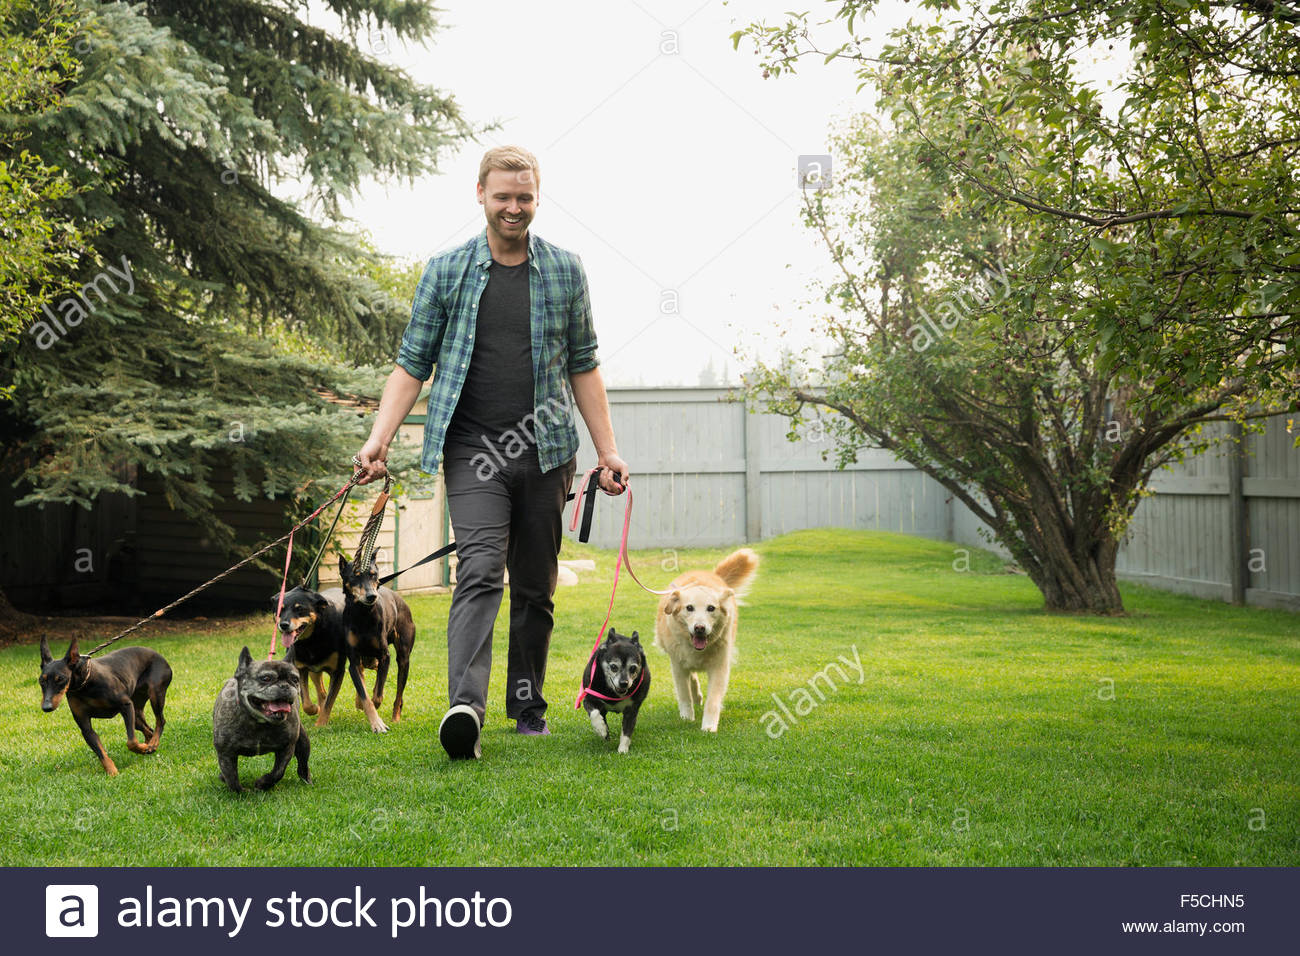 Man walking dogs on leashes in grass Stock Photo